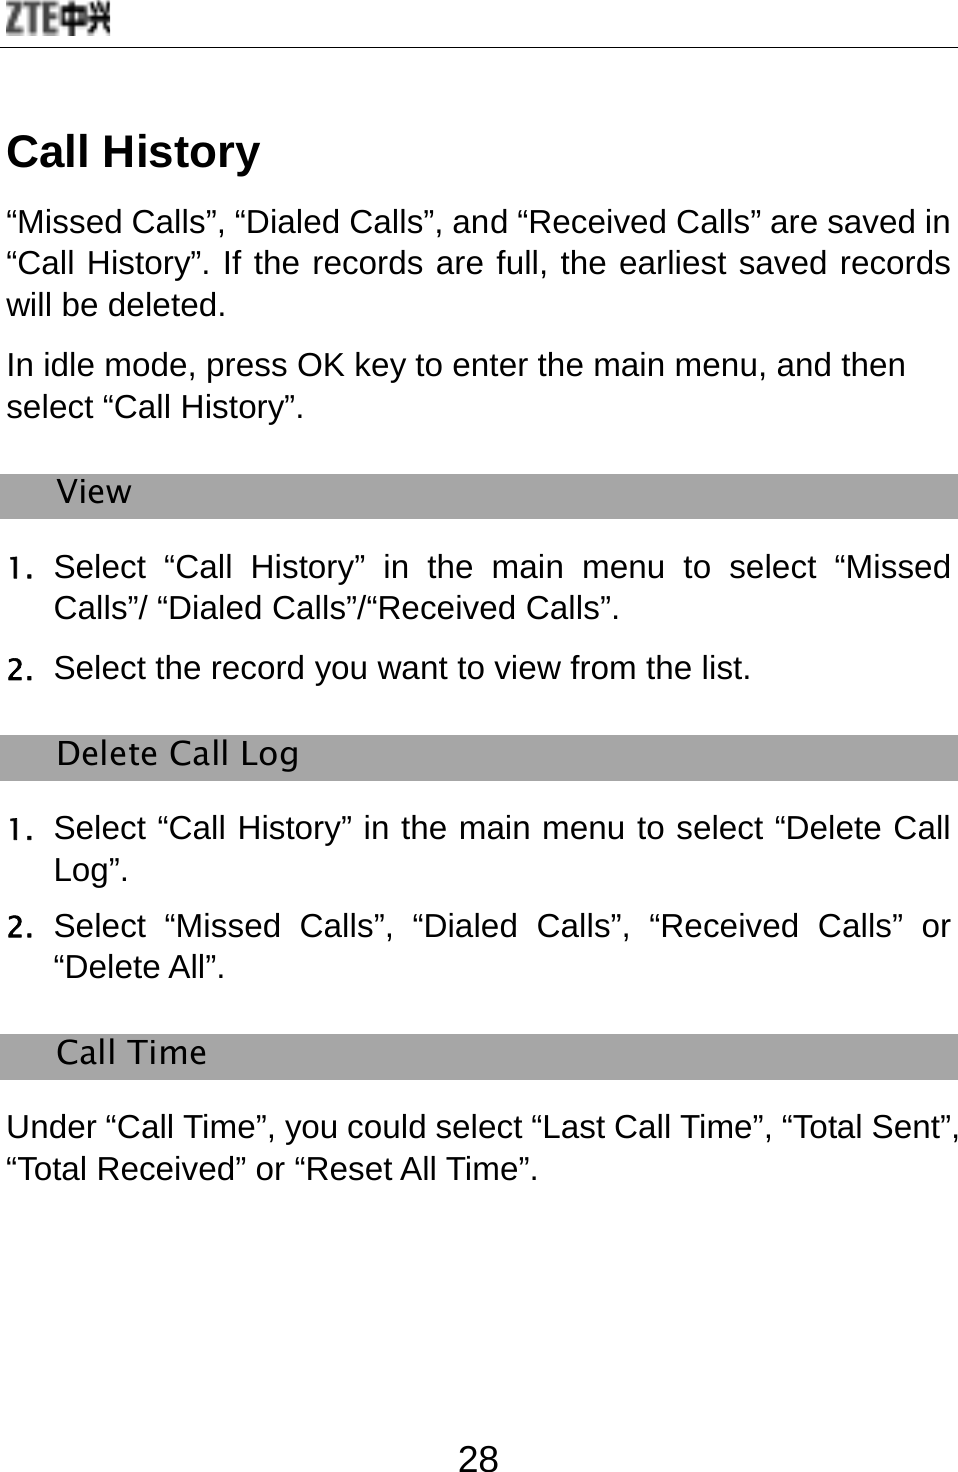  28 Call History “Missed Calls”, “Dialed Calls”, and “Received Calls” are saved in “Call History”. If the records are full, the earliest saved records will be deleted. In idle mode, press OK key to enter the main menu, and then select “Call History”. View 1. Select “Call History” in the main menu to select “Missed Calls”/ “Dialed Calls”/“Received Calls”. 2. Select the record you want to view from the list. Delete Call Log 1. Select “Call History” in the main menu to select “Delete Call Log”. 2. Select “Missed Calls”, “Dialed Calls”, “Received Calls” or “Delete All”. Call Time Under “Call Time”, you could select “Last Call Time”, “Total Sent”, “Total Received” or “Reset All Time”.   